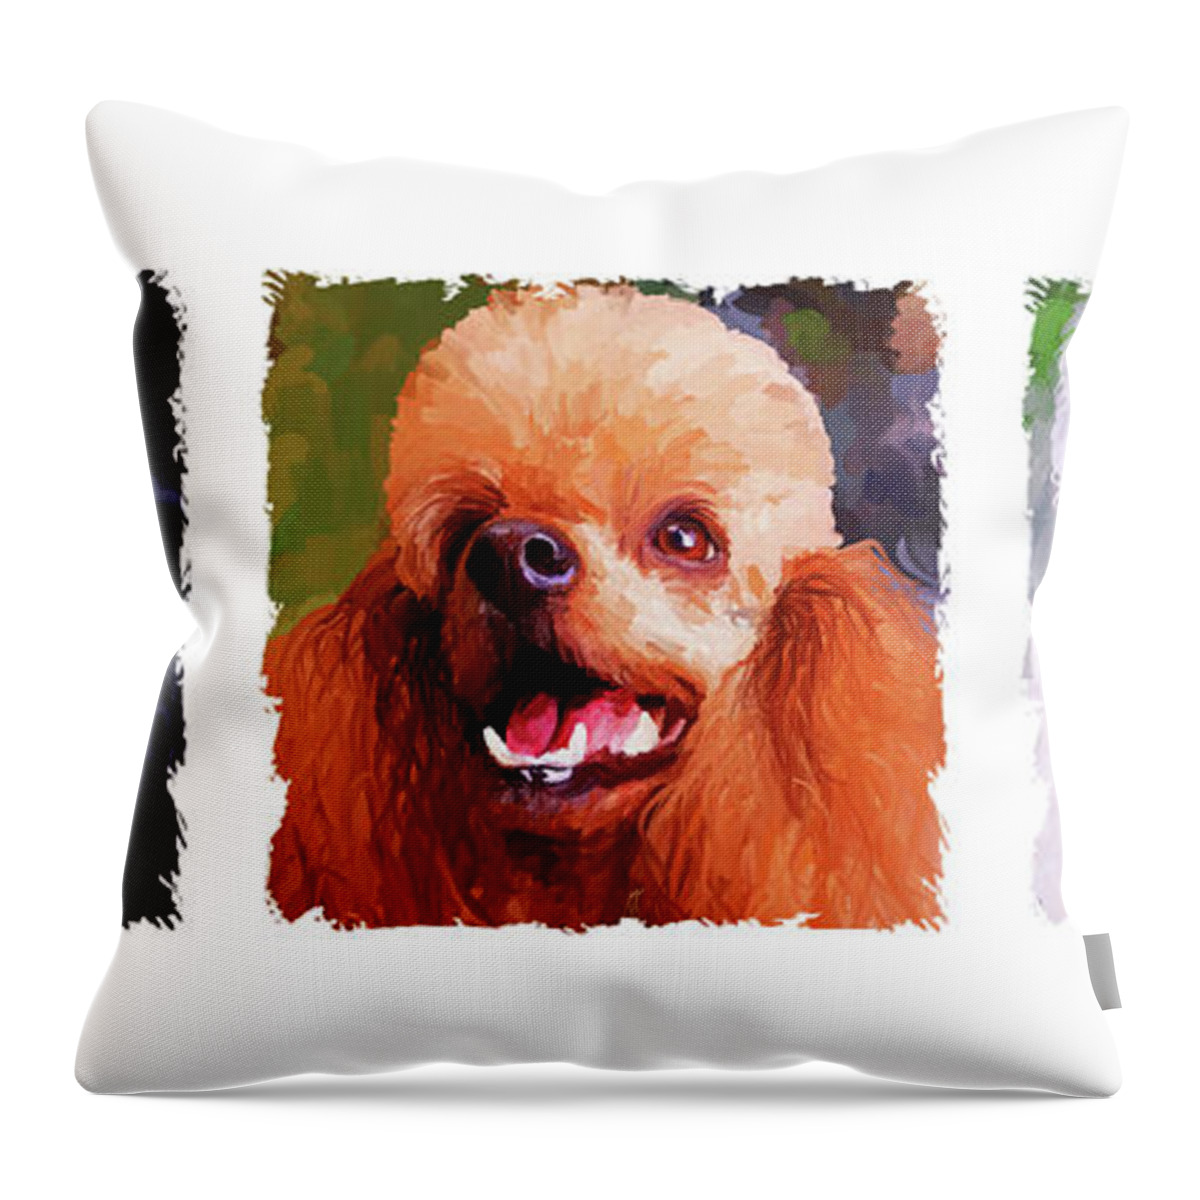 Poodle Throw Pillow featuring the painting Poodle Trio by Jai Johnson